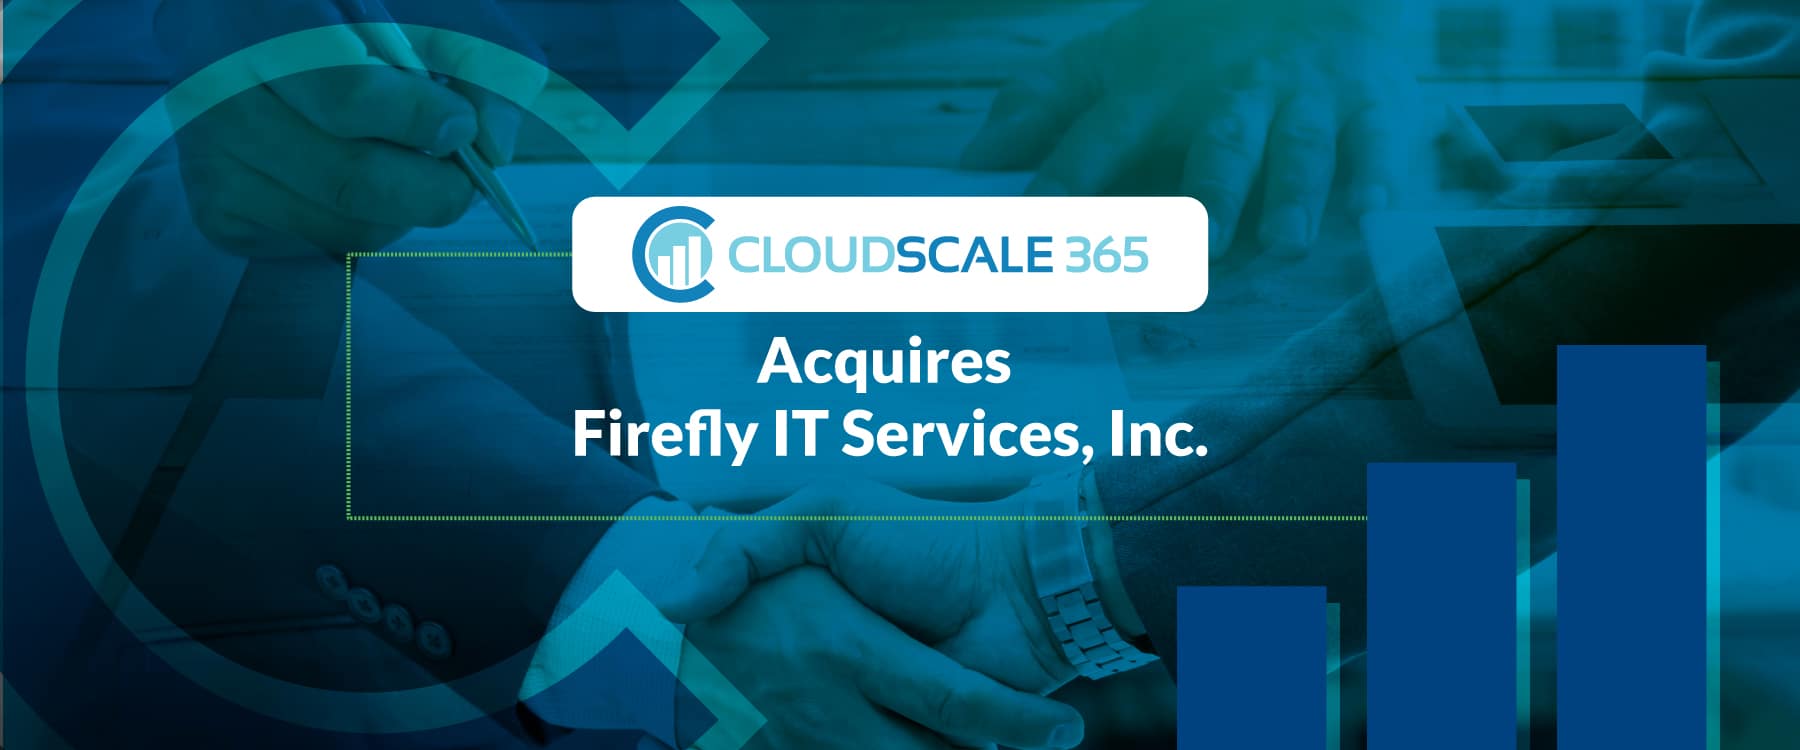 CloudScale365 Acquires Firefly IT Services